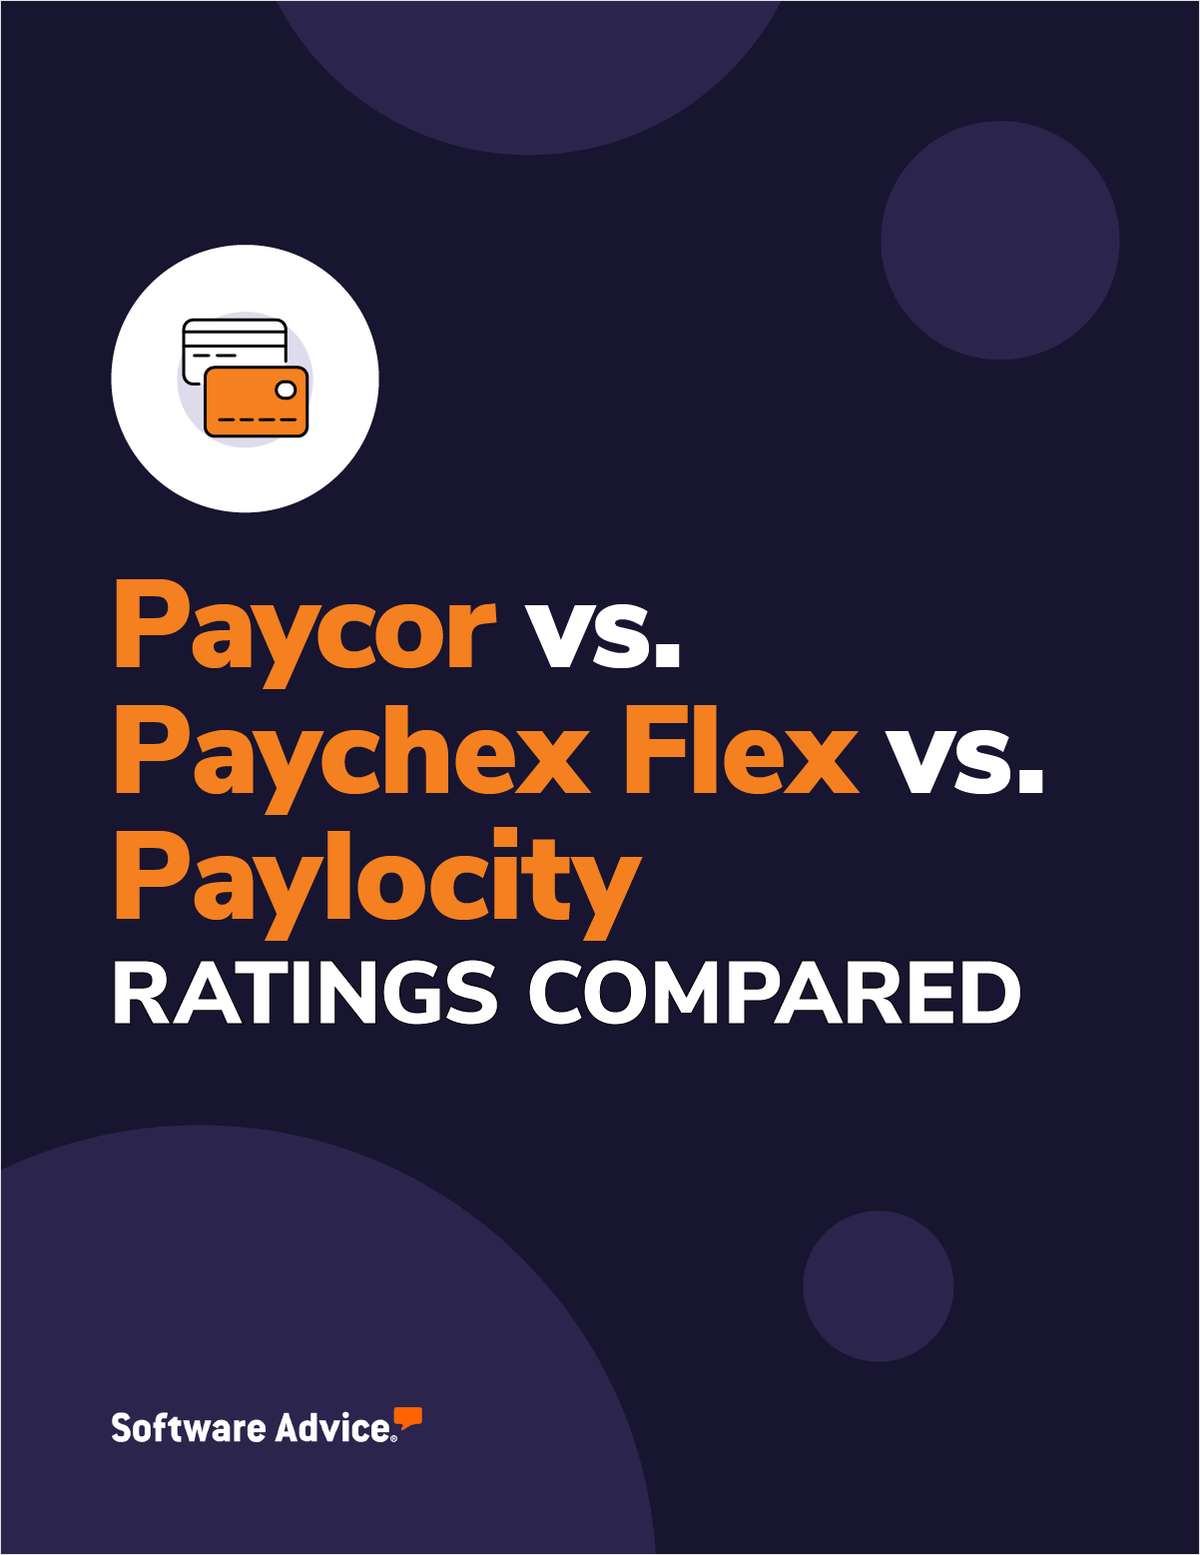 Paycor vs. Paychex Flex vs. Paylocity Ratings Compared